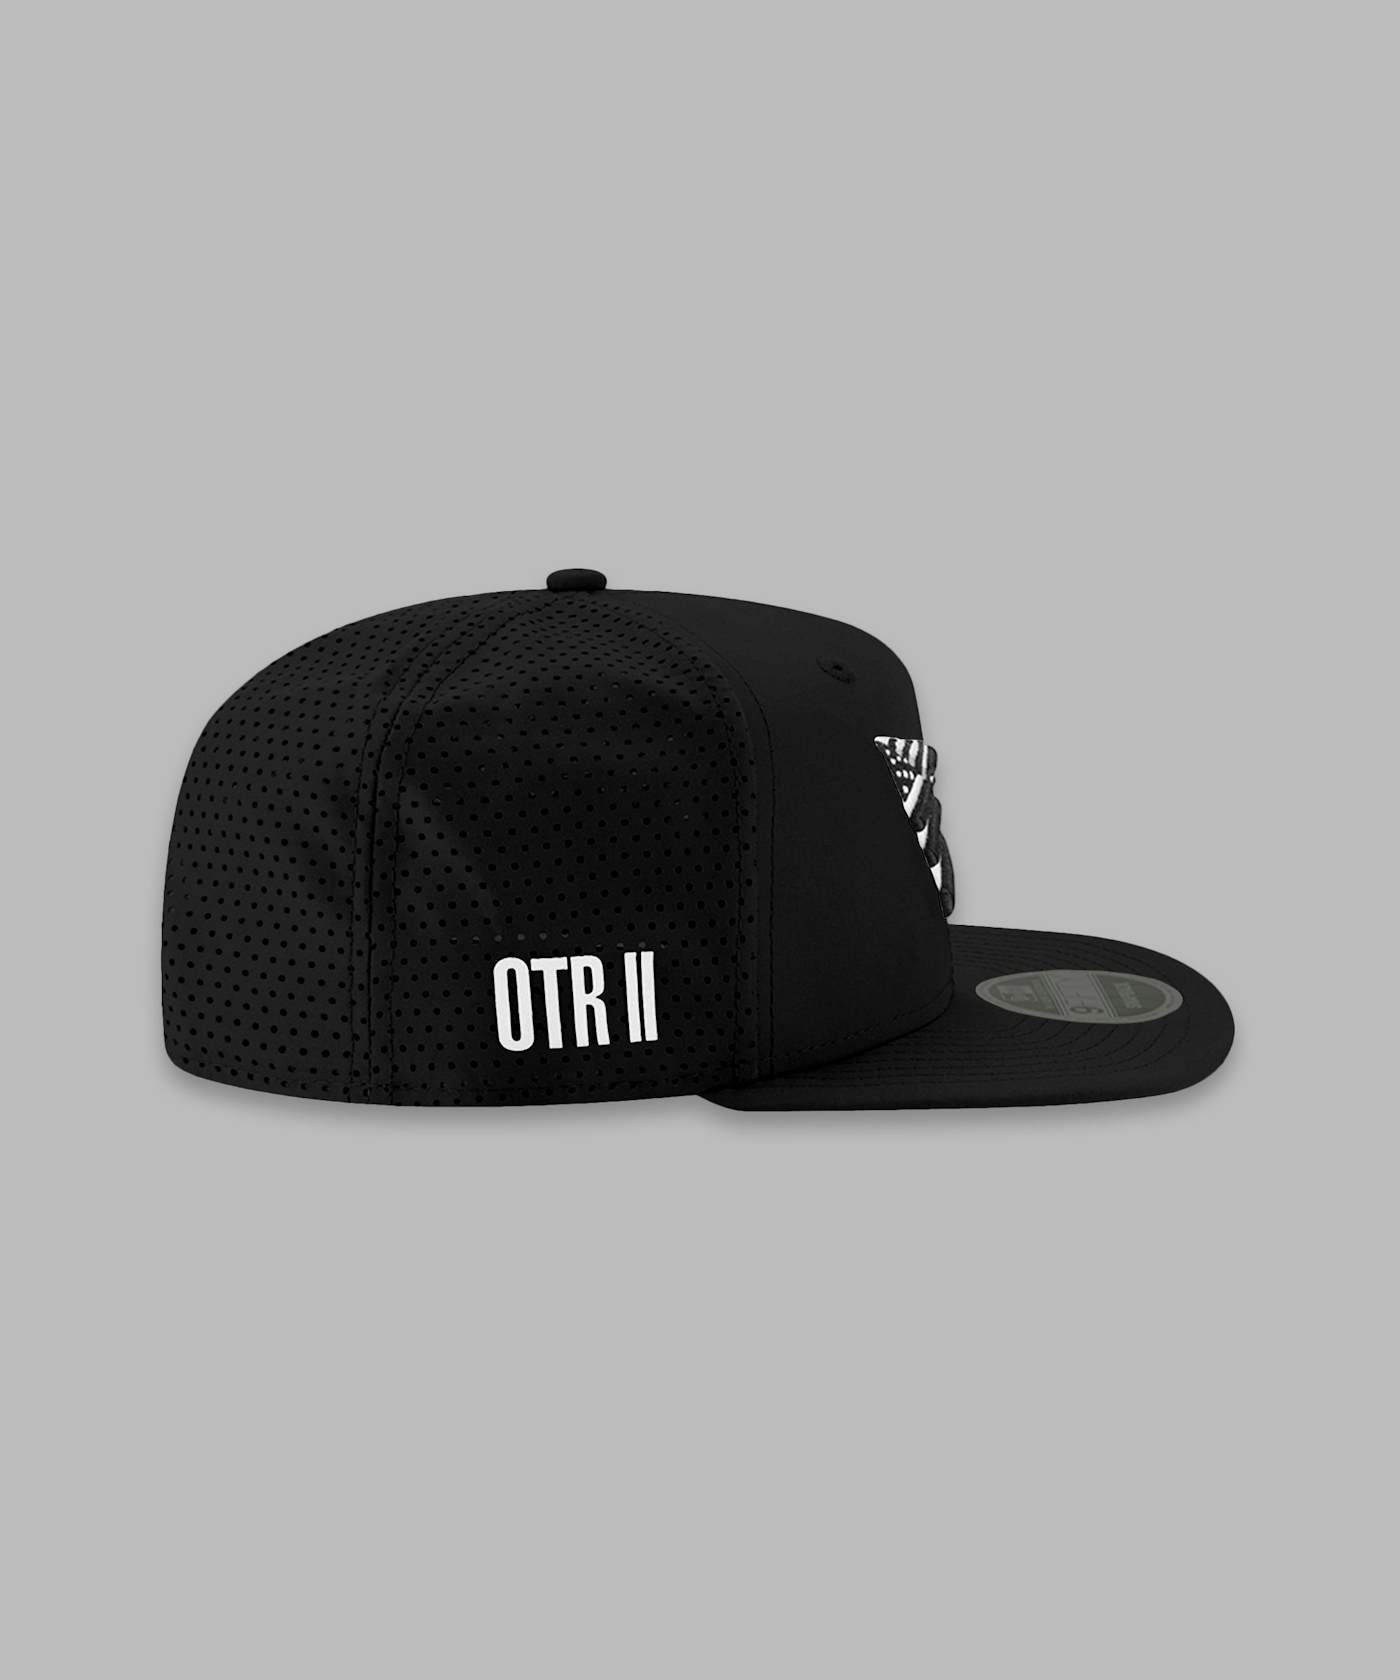 JAY-Z Perforated Black On The Run II High Crown 9Fifty Snapback Hat $45.00